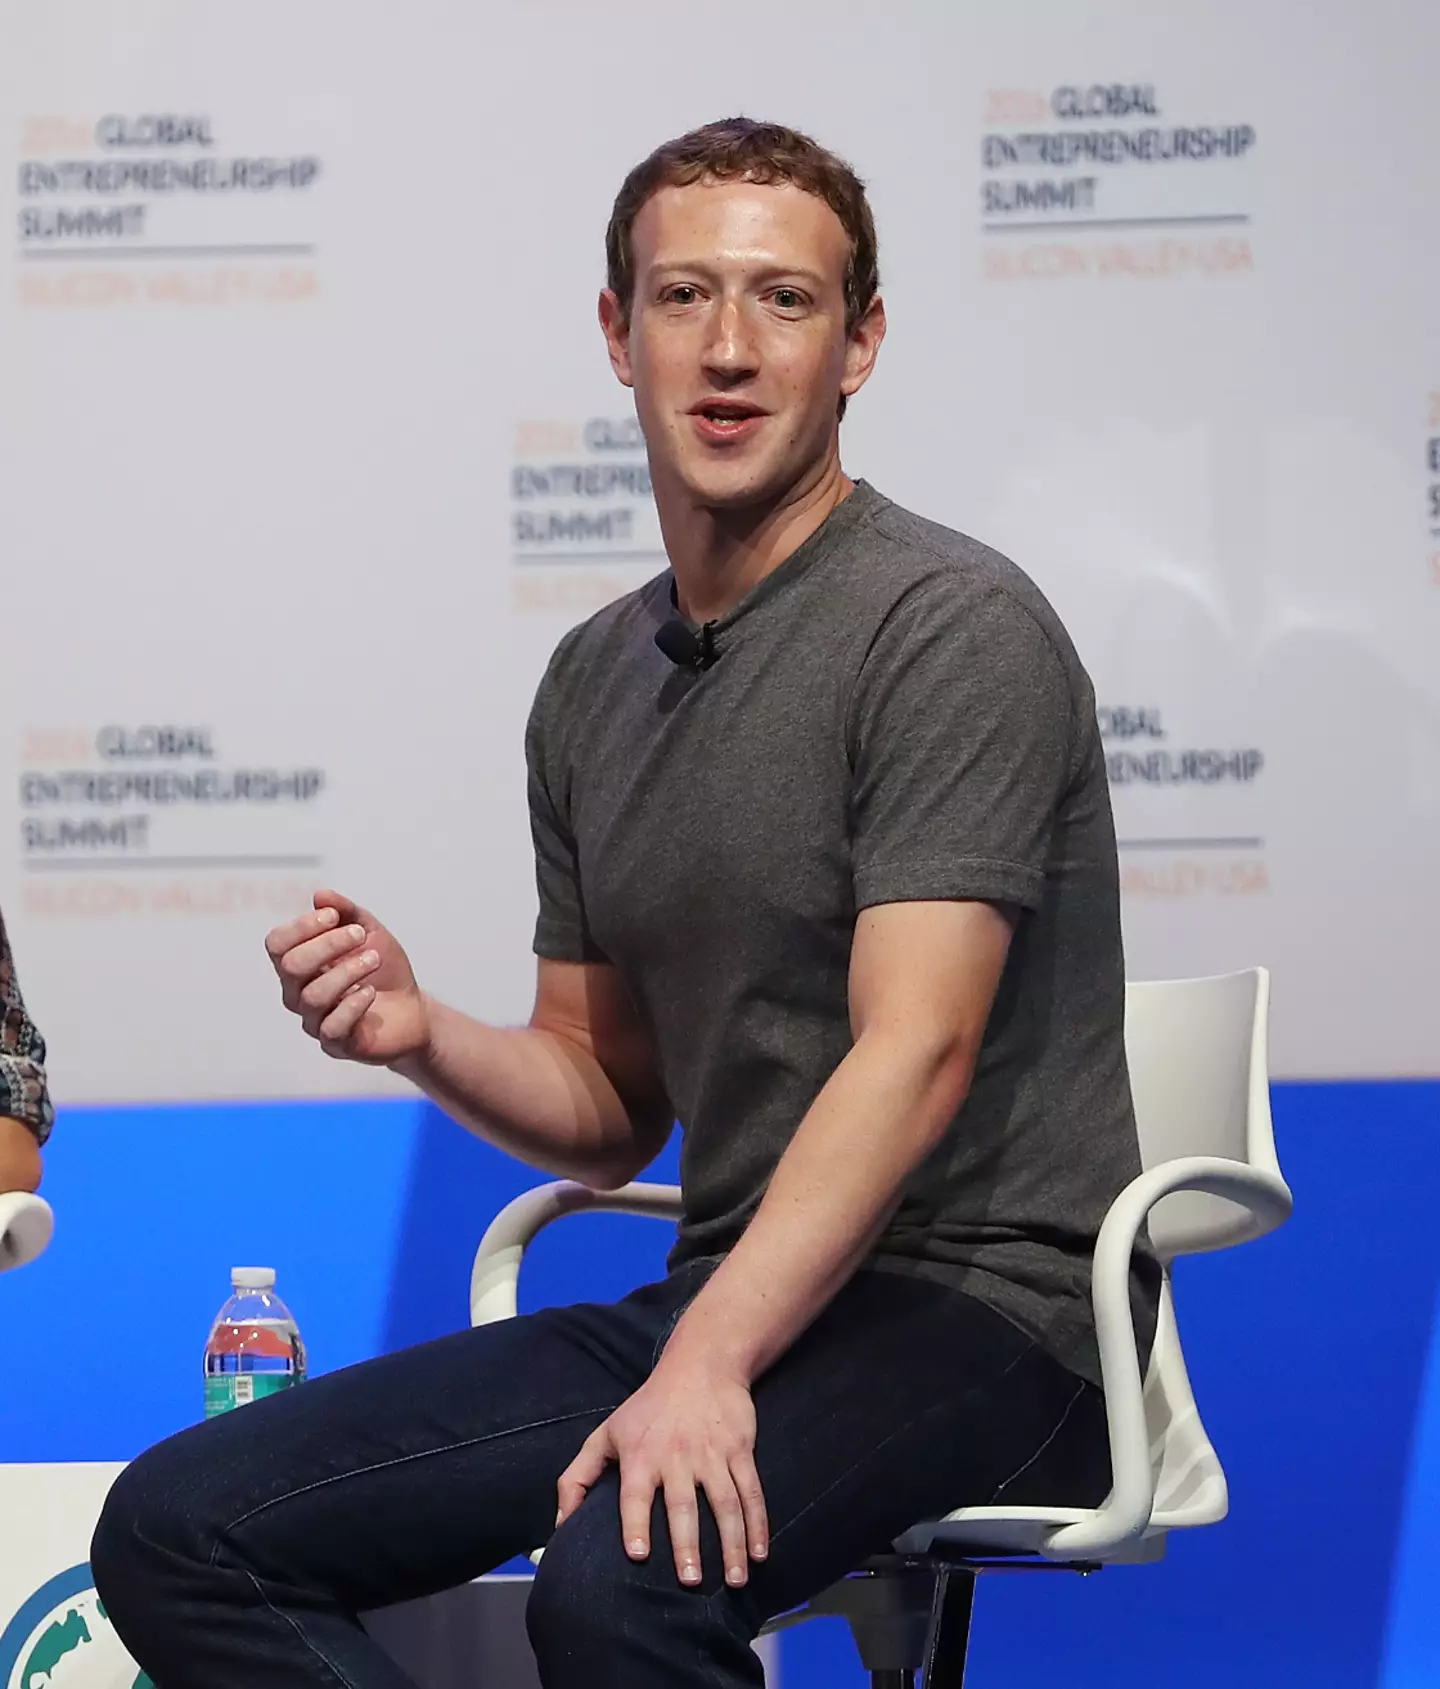 Zuckerberg donning his famous Gray tee.